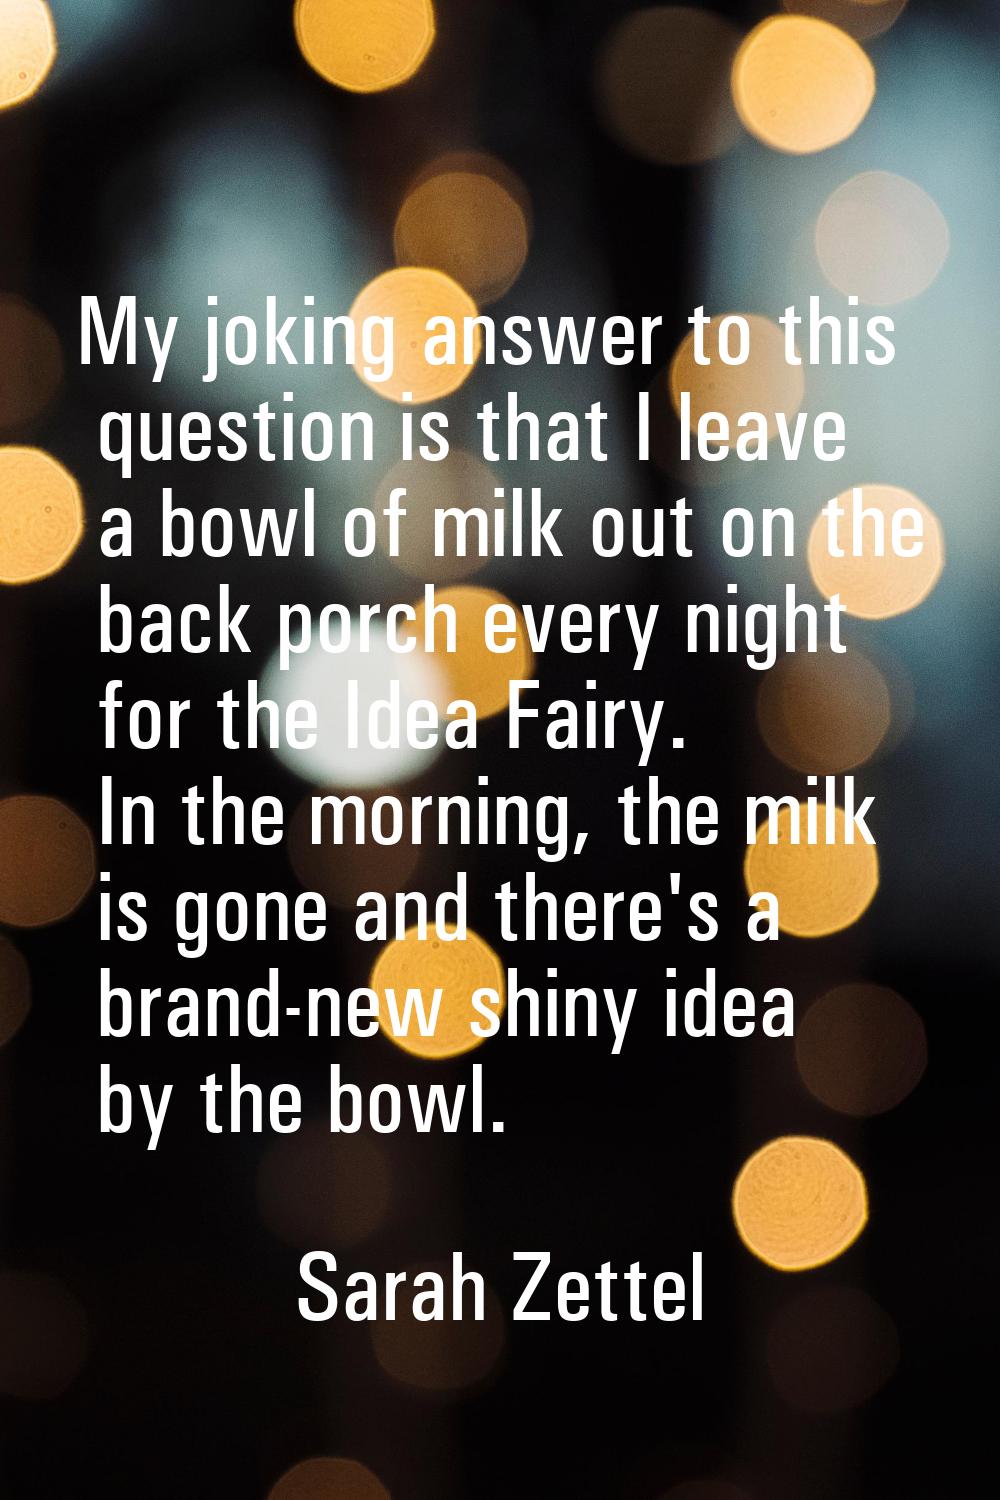 My joking answer to this question is that I leave a bowl of milk out on the back porch every night 